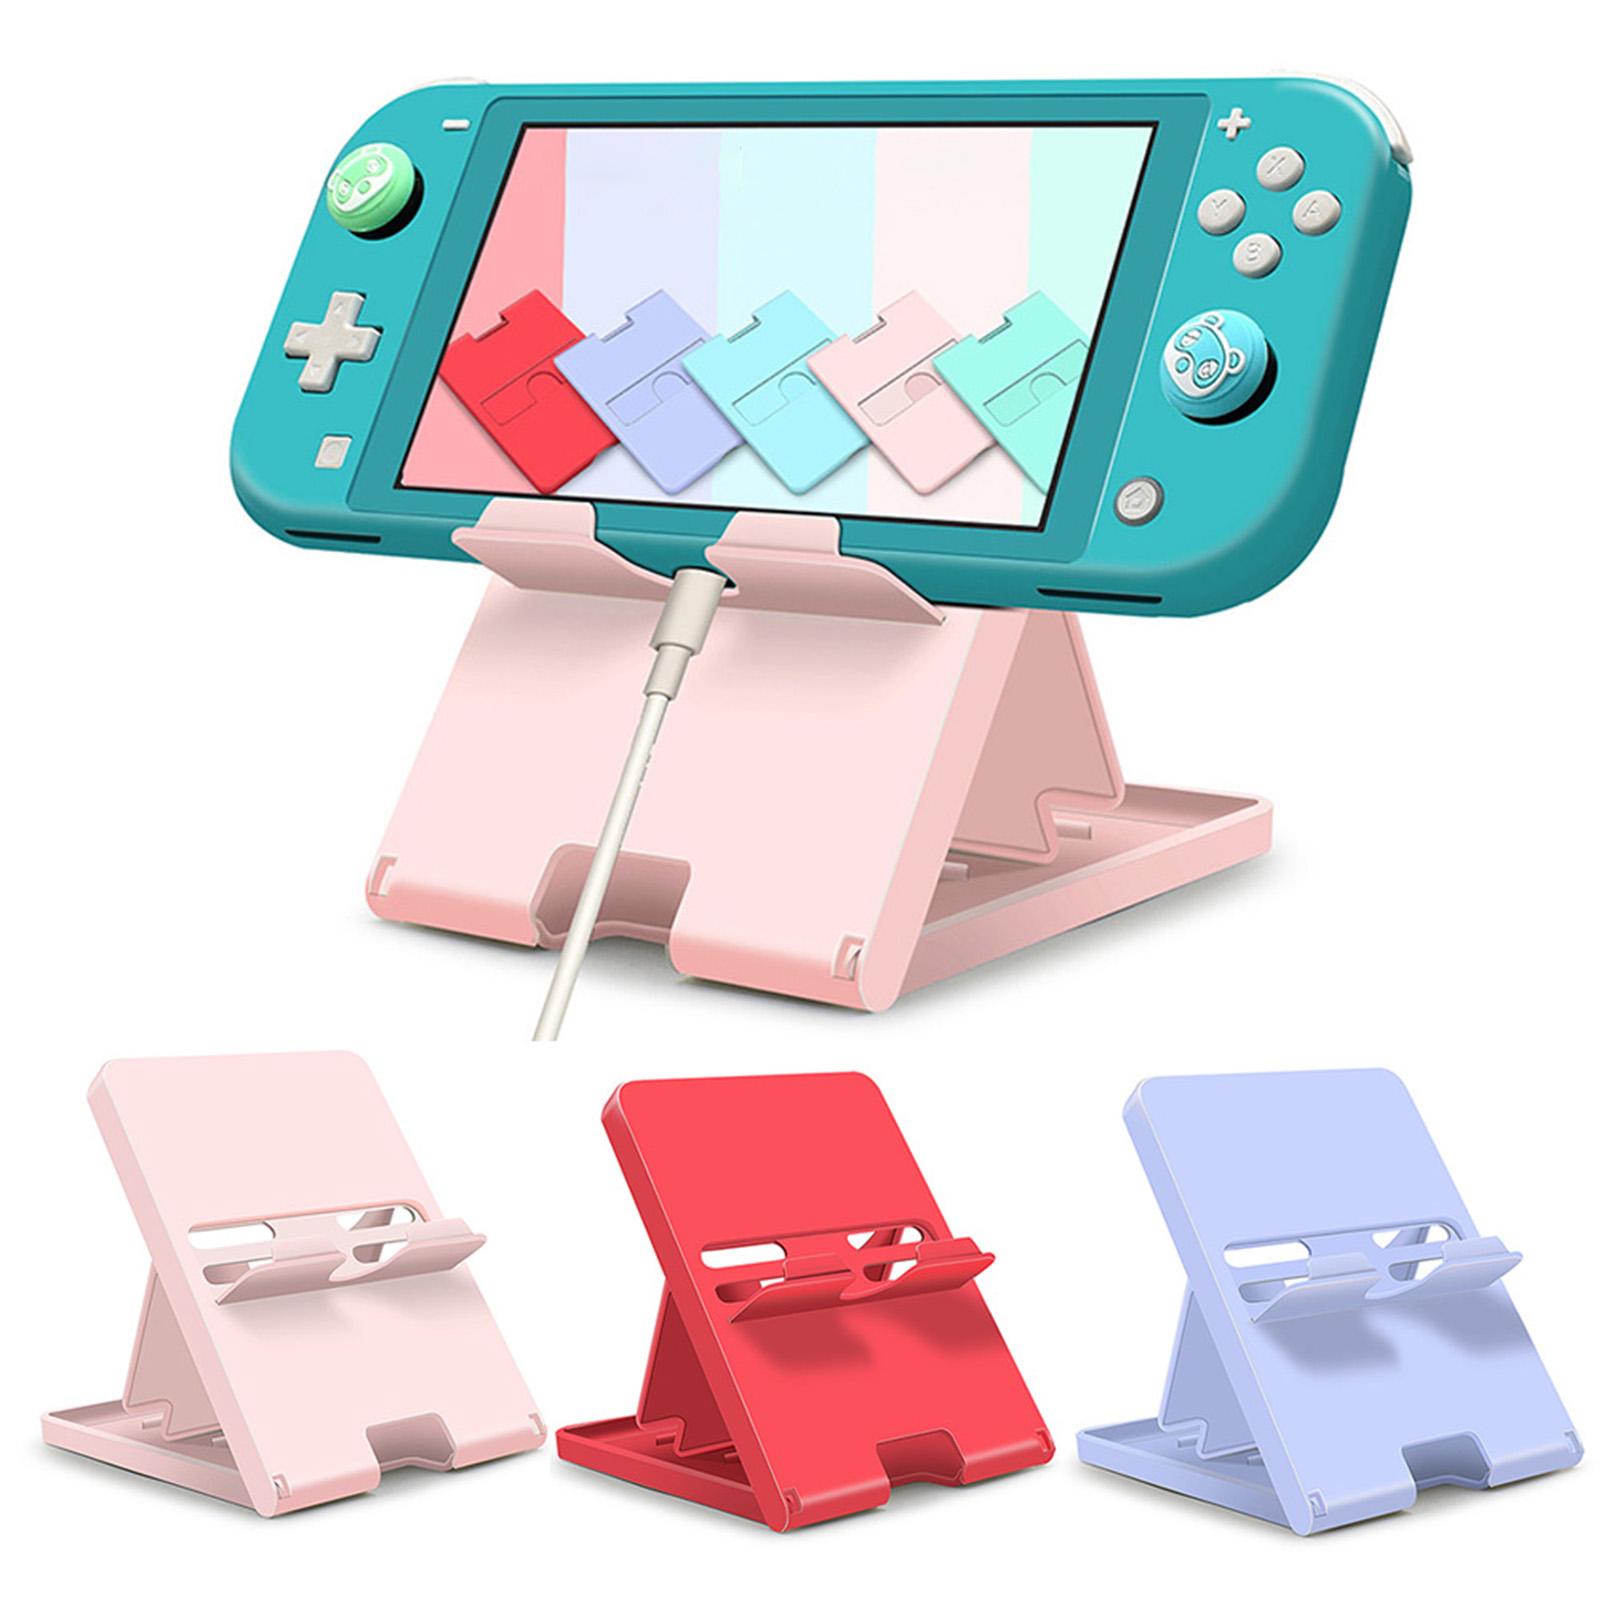 Holder Game Stand Bracket Base Desk Cradle For Nintendo Switch NS and Switch Lite Mini Accessories Console Base Support